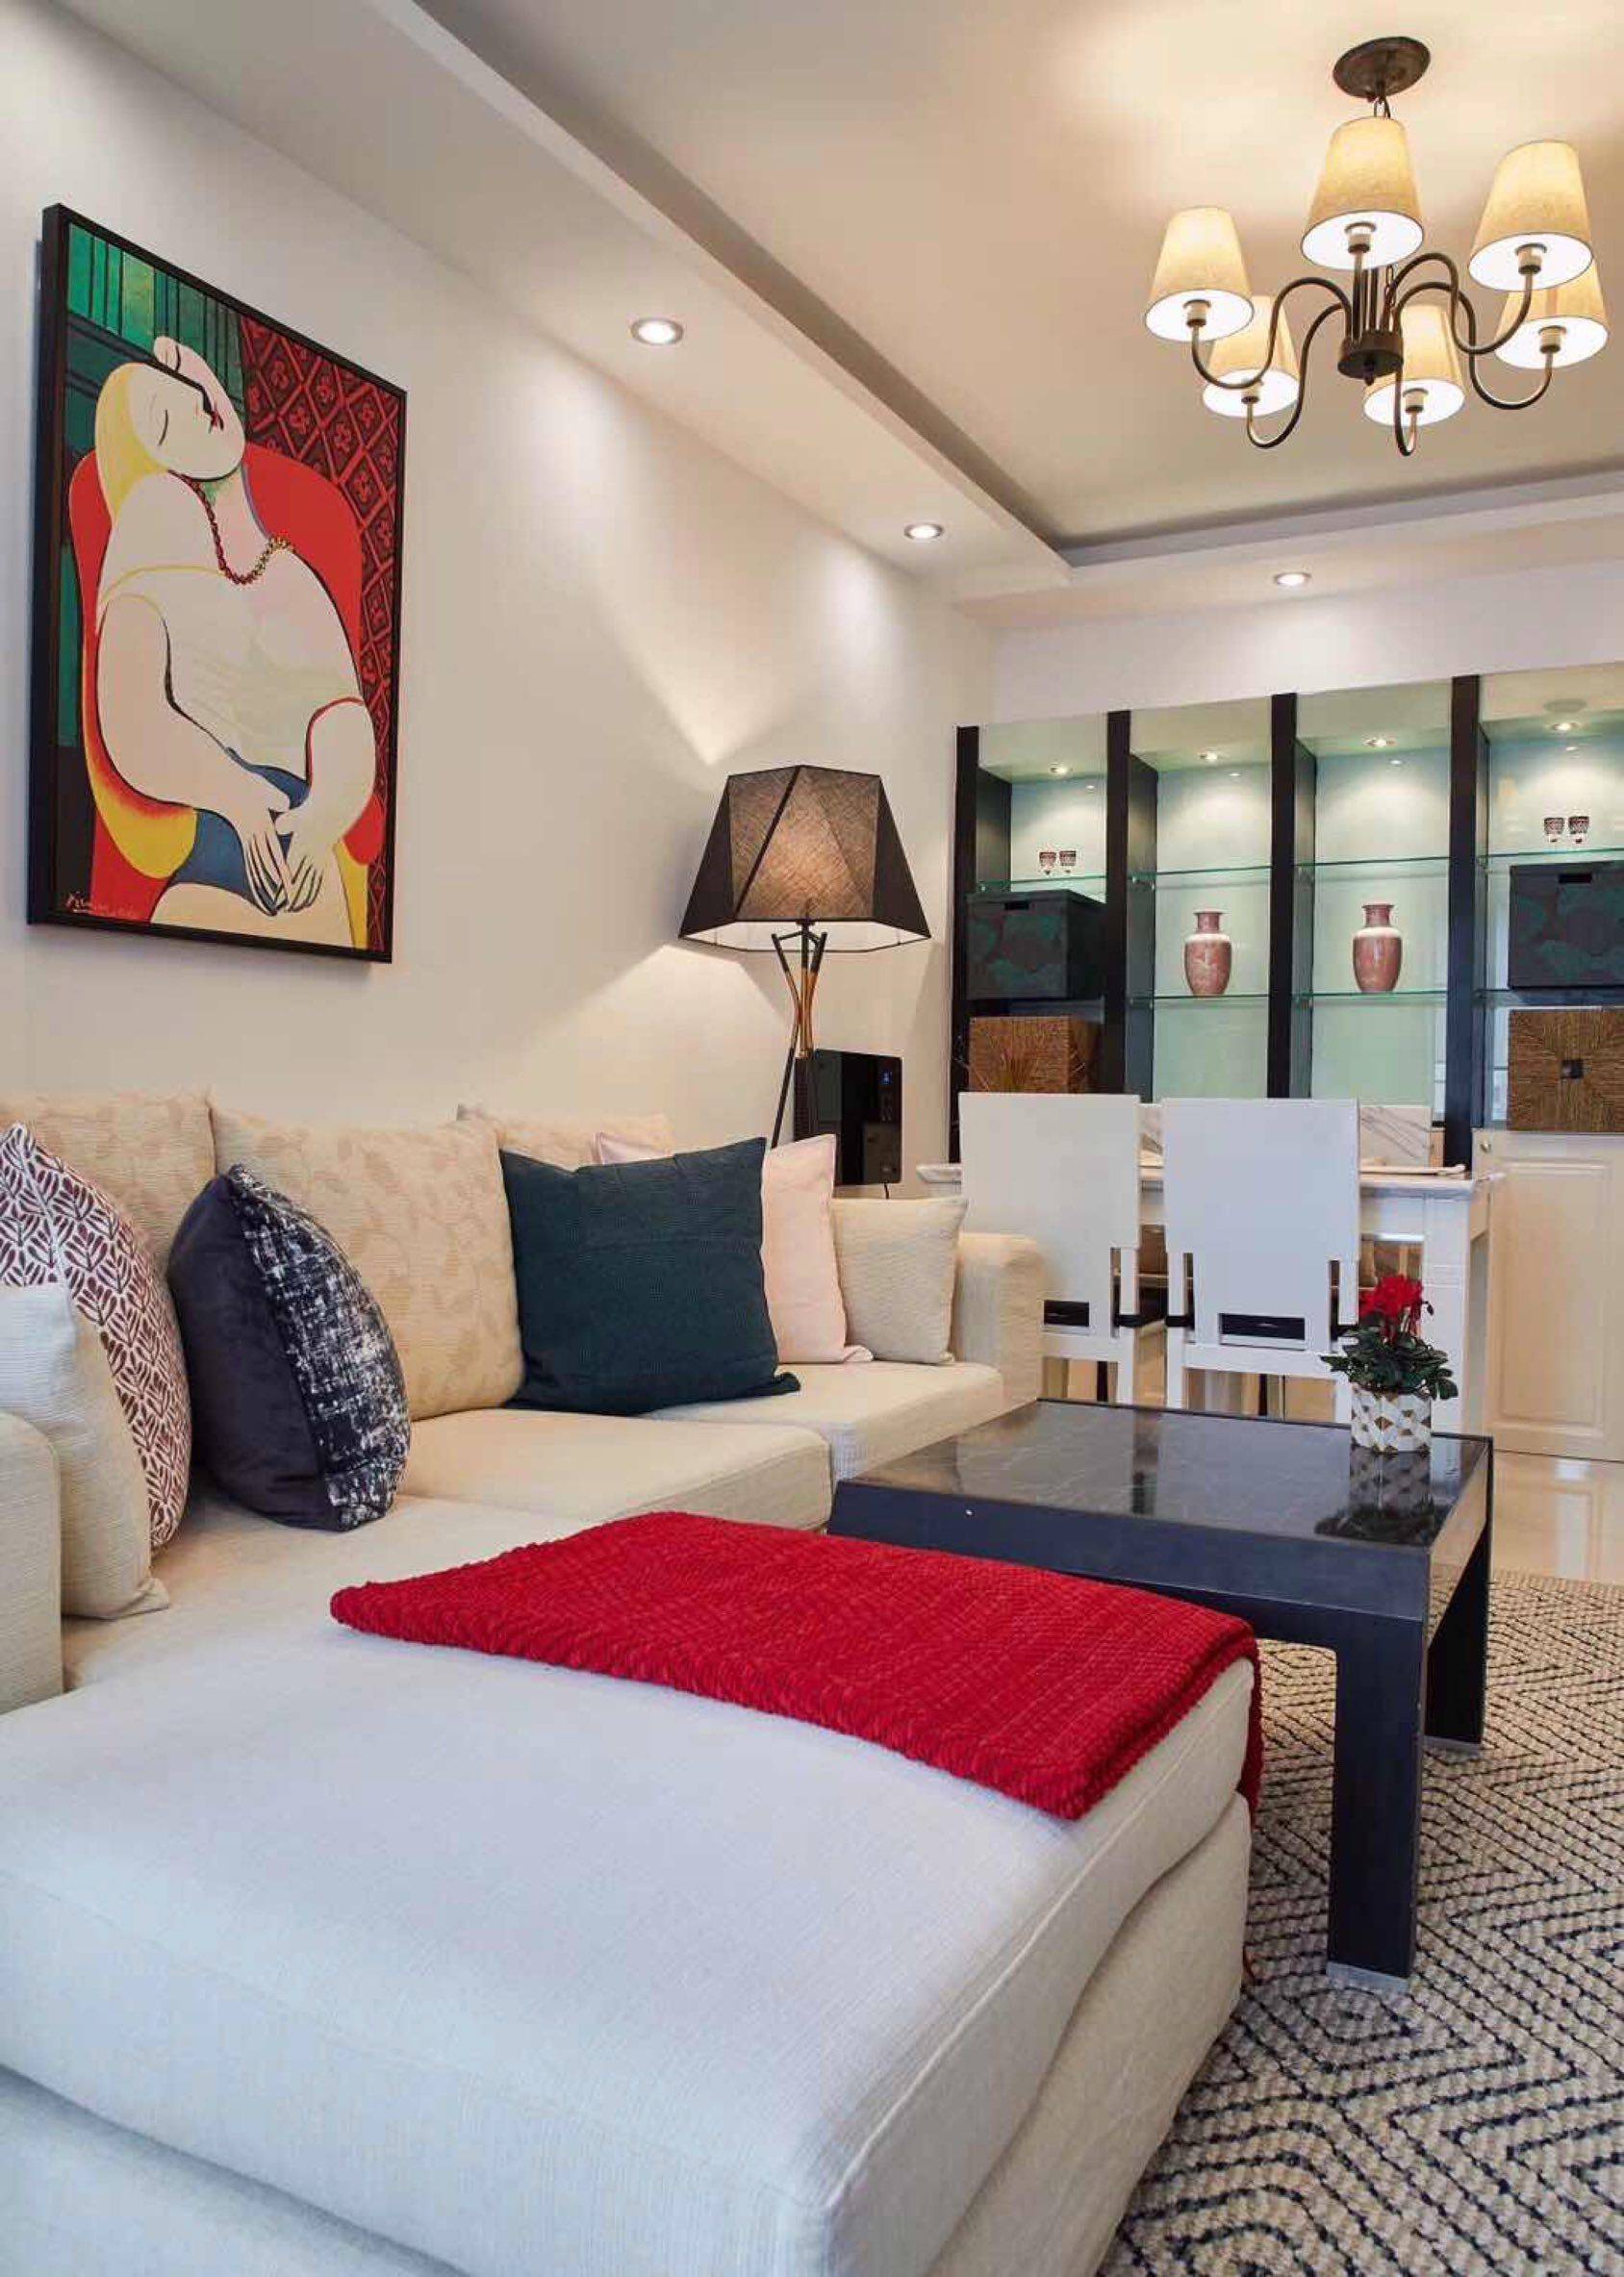 Shanghai-Jing‘An-Cozy Home,Clean&Comfy,“Friends”,Chilled,Pet Friendly